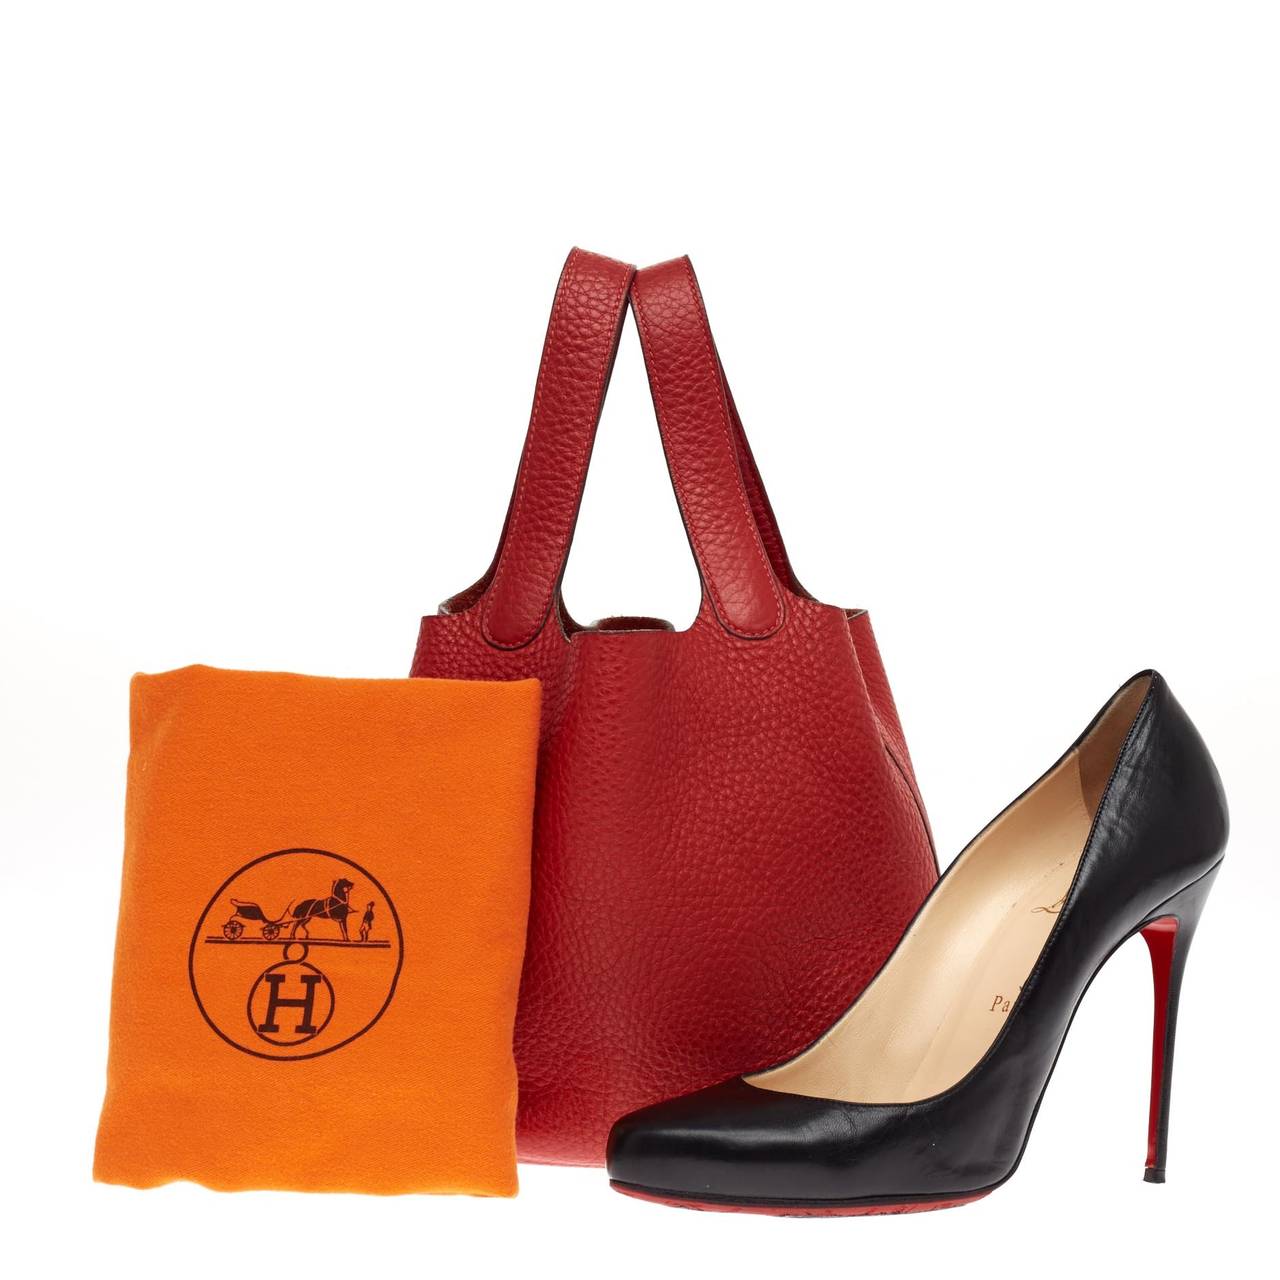 This petite authentic Hermes Picotin Clemence in size PM in stunning Rouge Vif red is as functional as it is stylish. Accented with polished palladium hardware, this beautiful handle bag features a unique one-piece closing design with a clip and